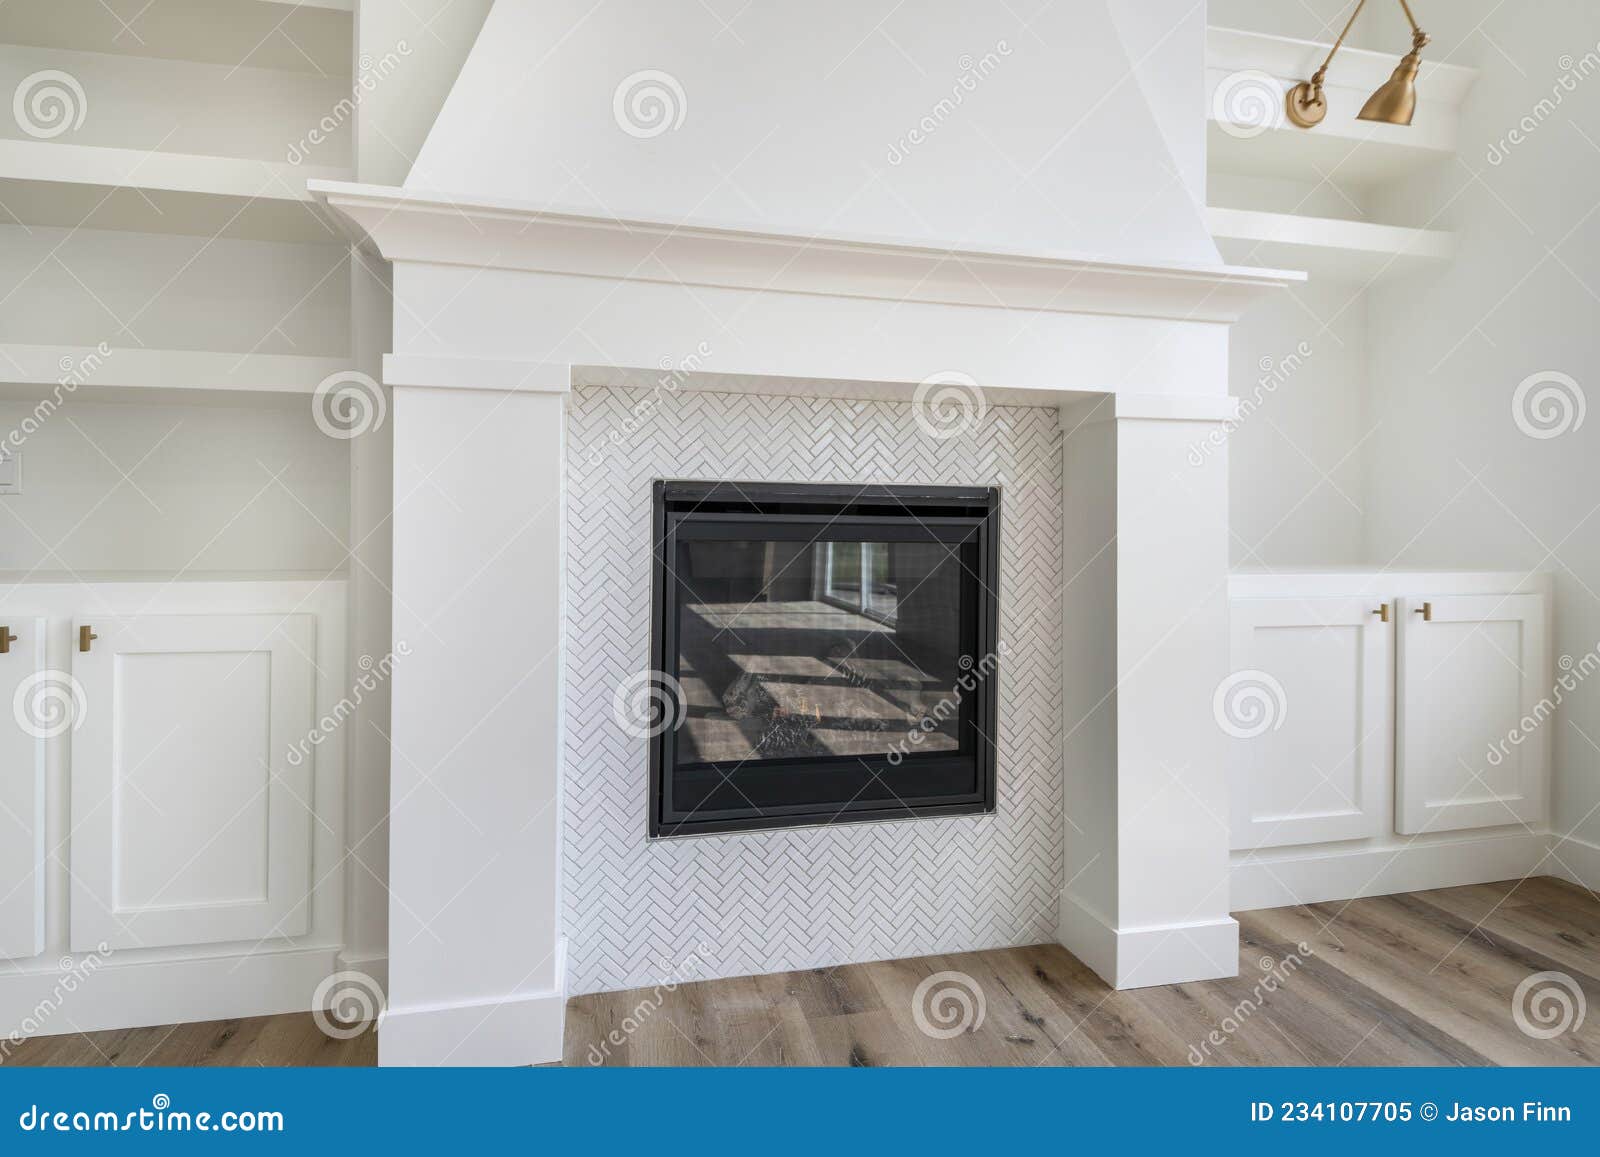 fireplace with white tiles in herringbone pattern surround